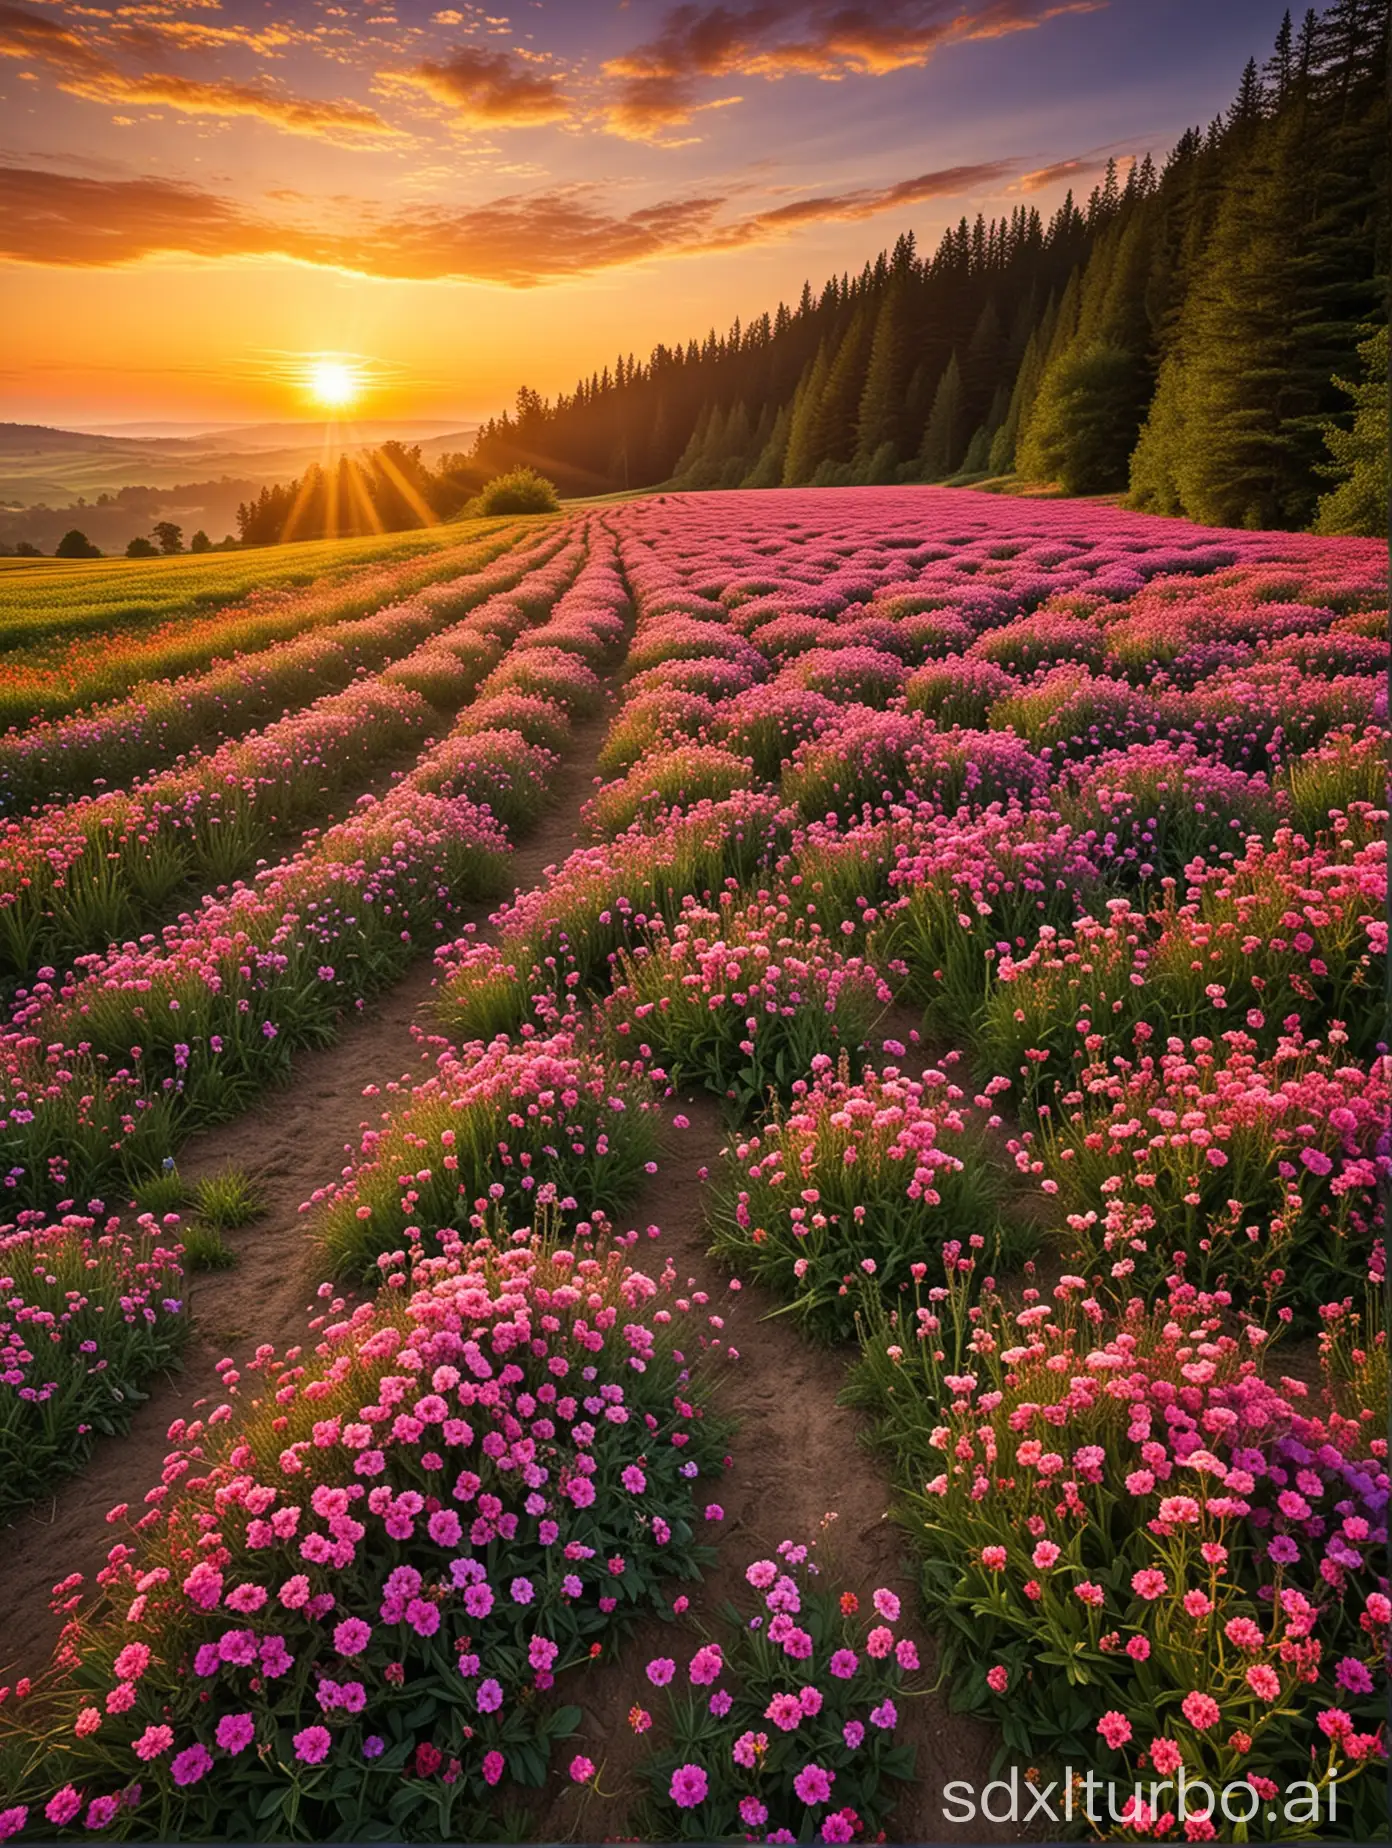 Vibrant-Flower-Fields-and-Lush-Forests-Captivating-Landscapes-of-Abundance